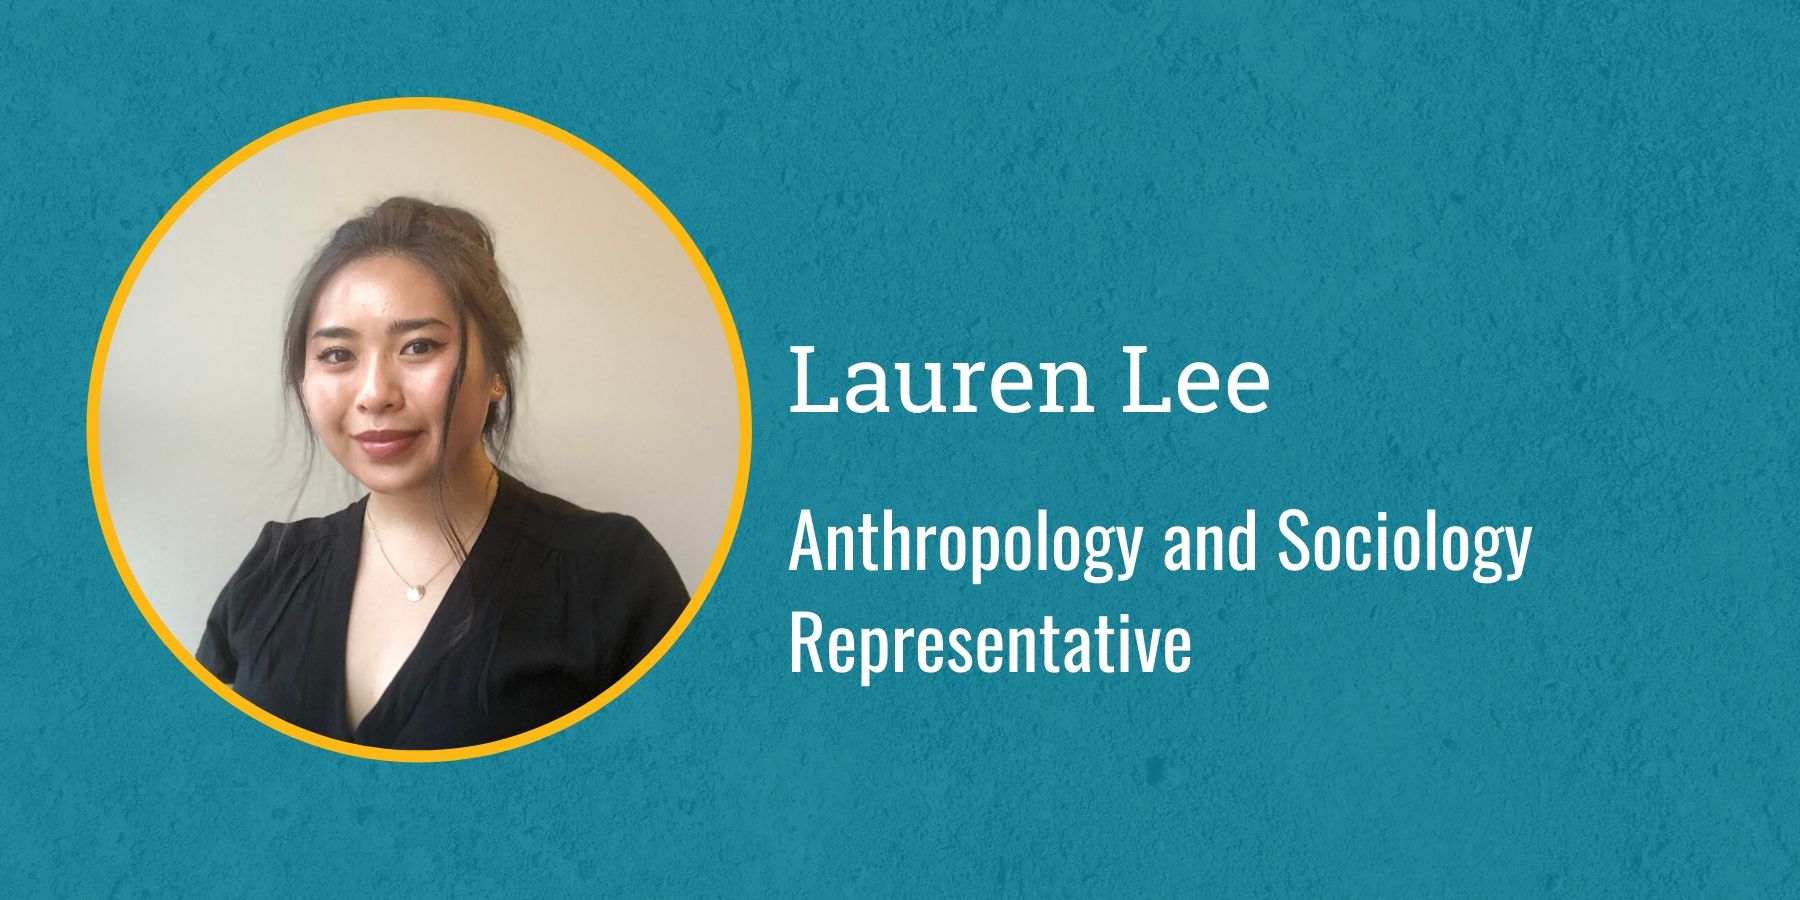 Photo of Lauren Lee and text: Anthropology and Sociology Representative